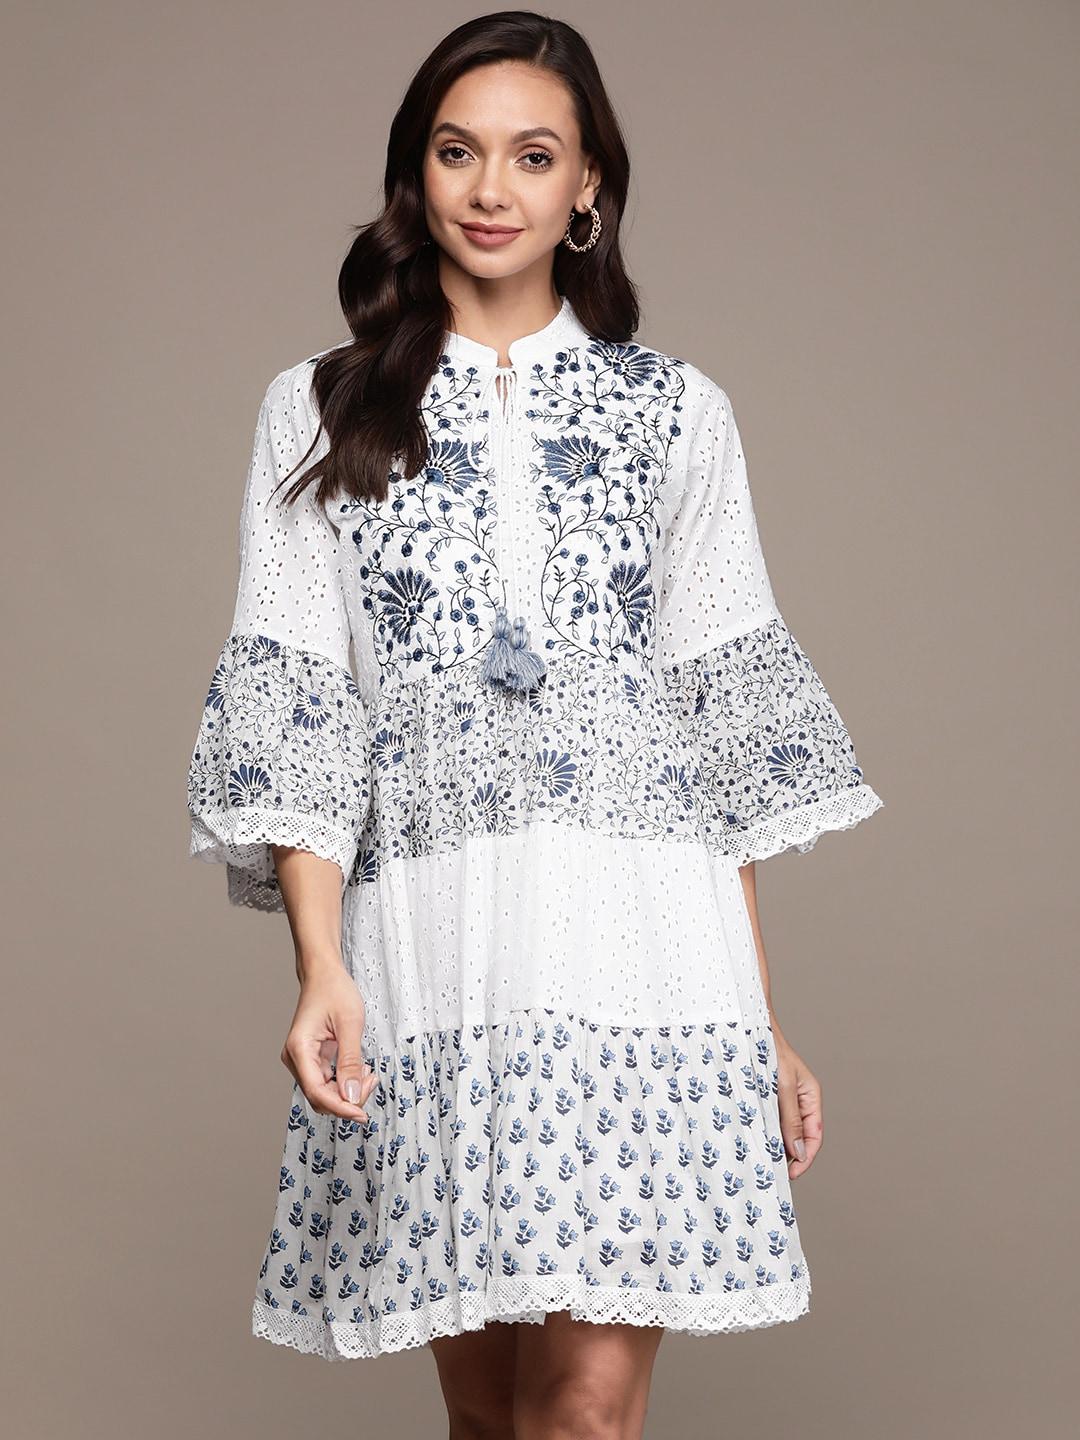 ishin-white-&-navy-blue-floral-embroidered-tie-up-neck-a-line-dress